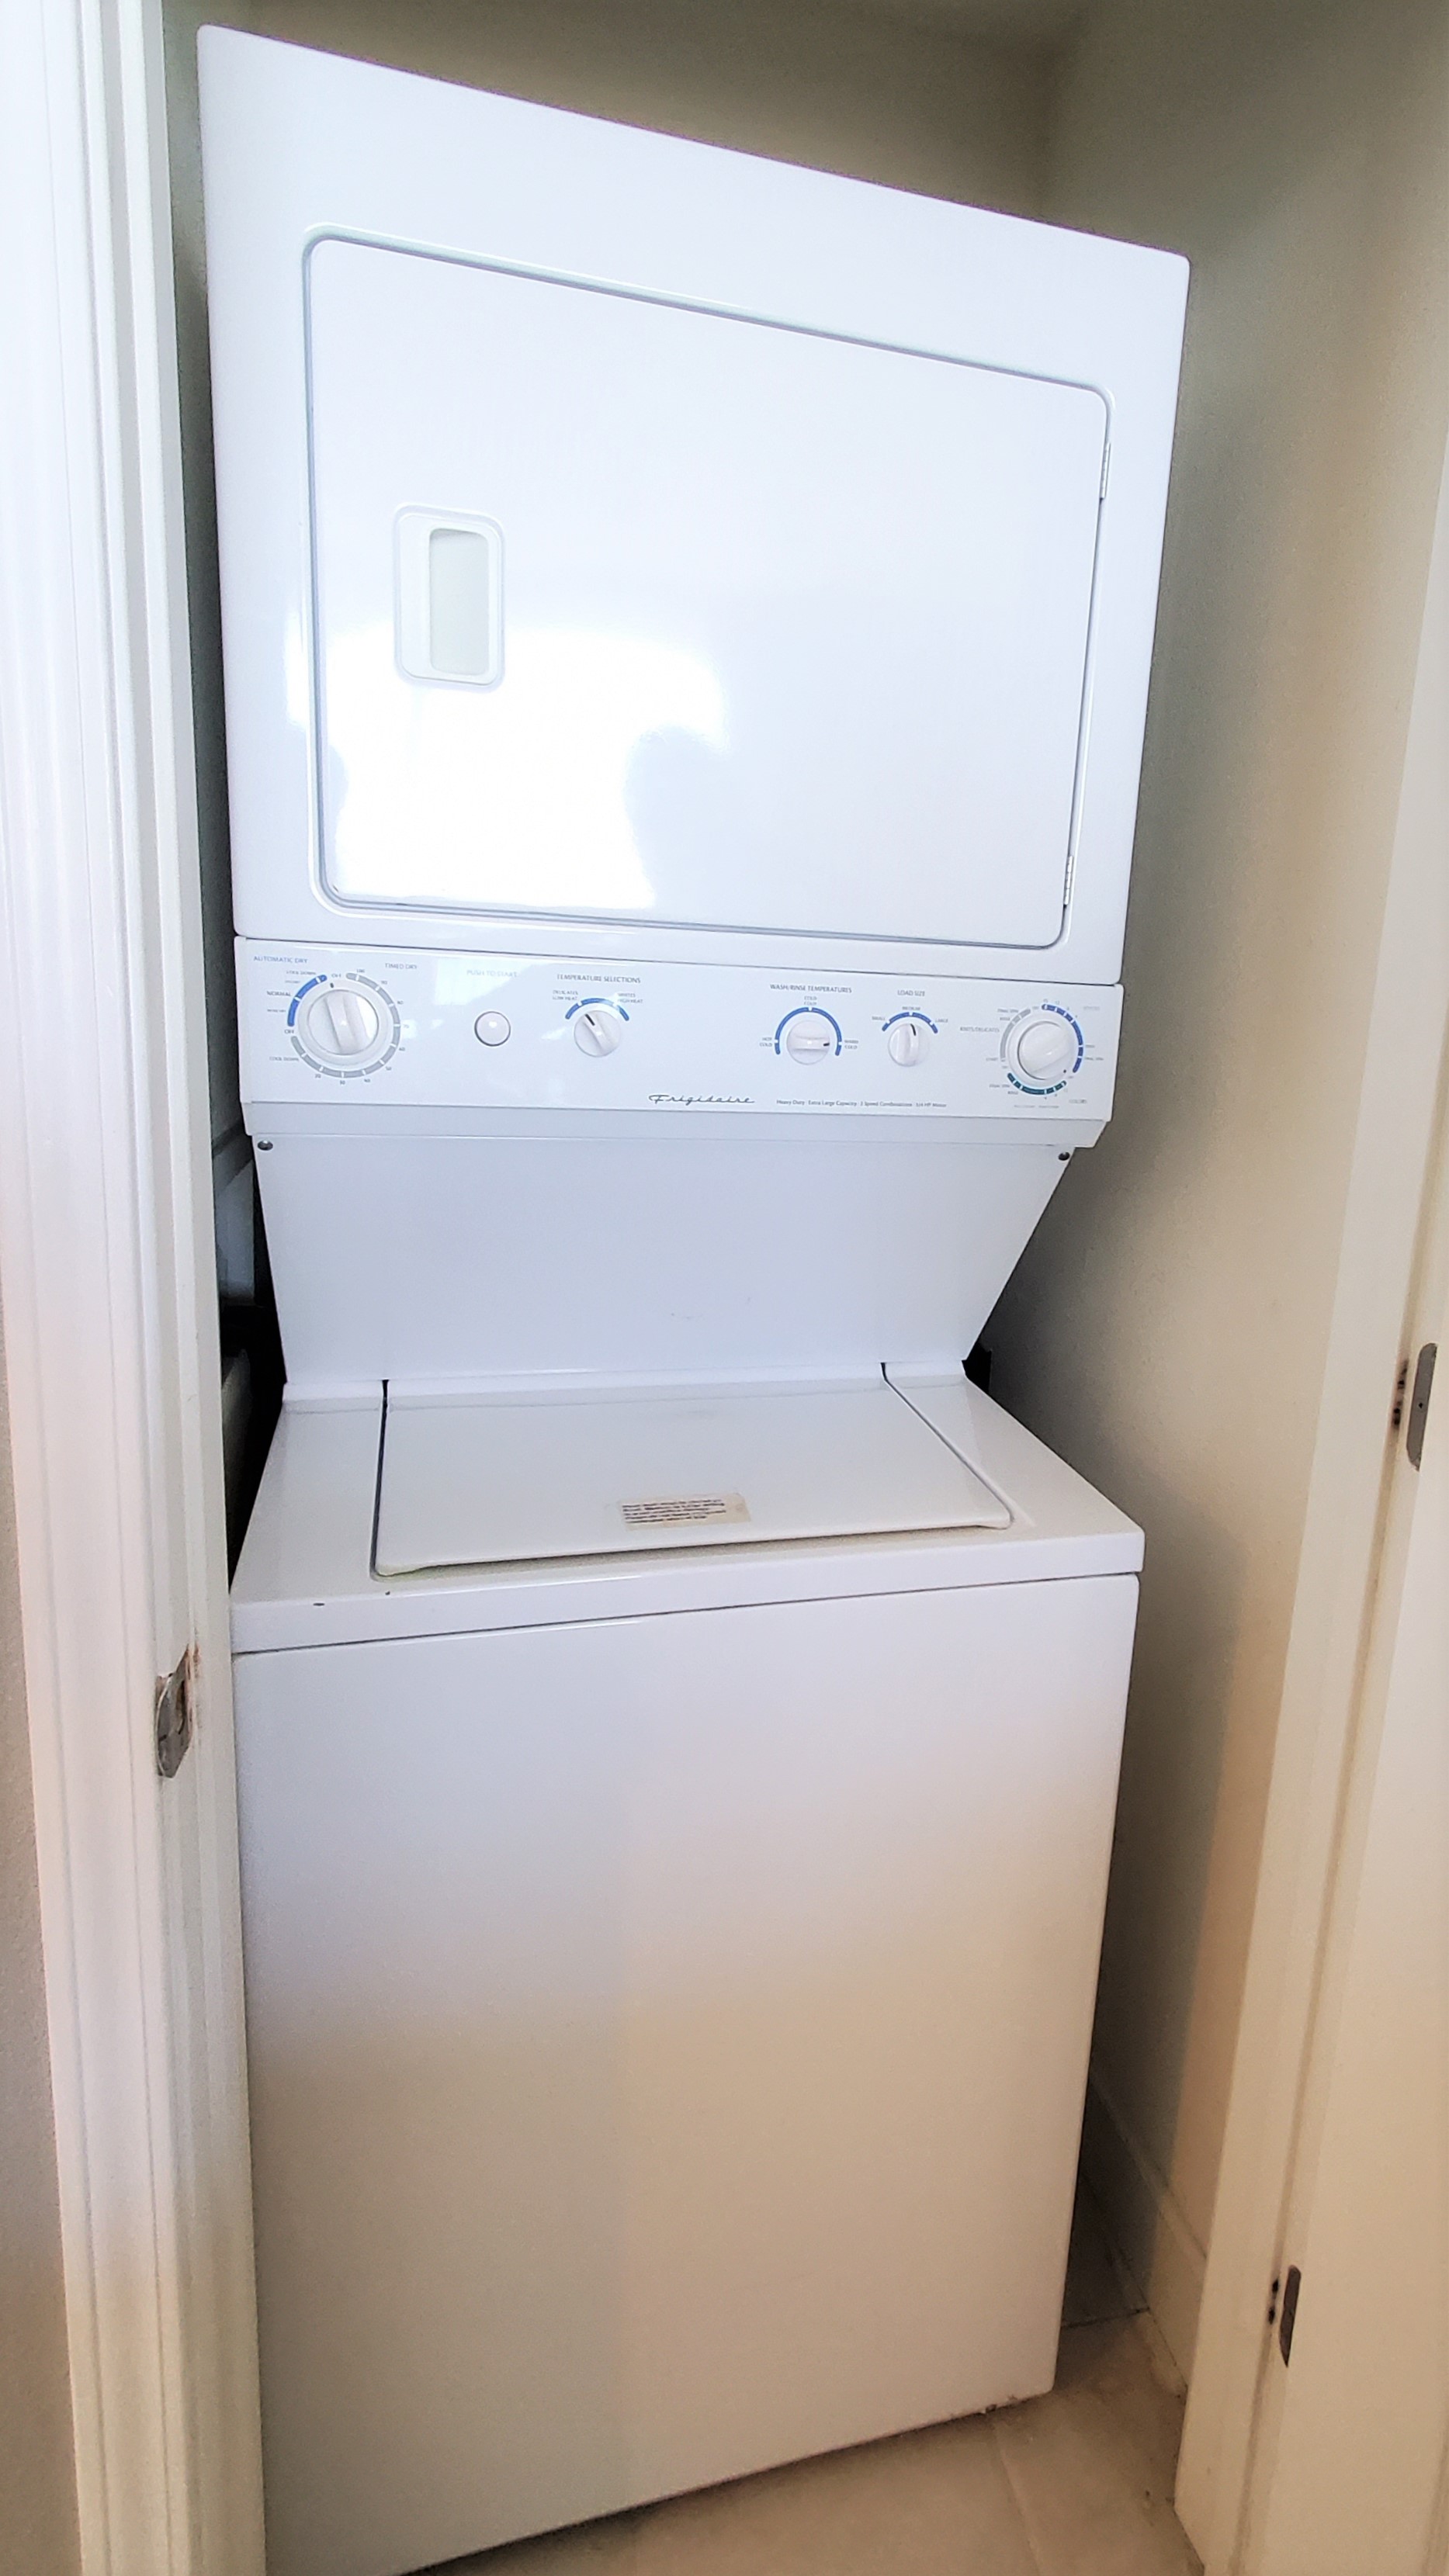 Unit 506 Washer and Dryer